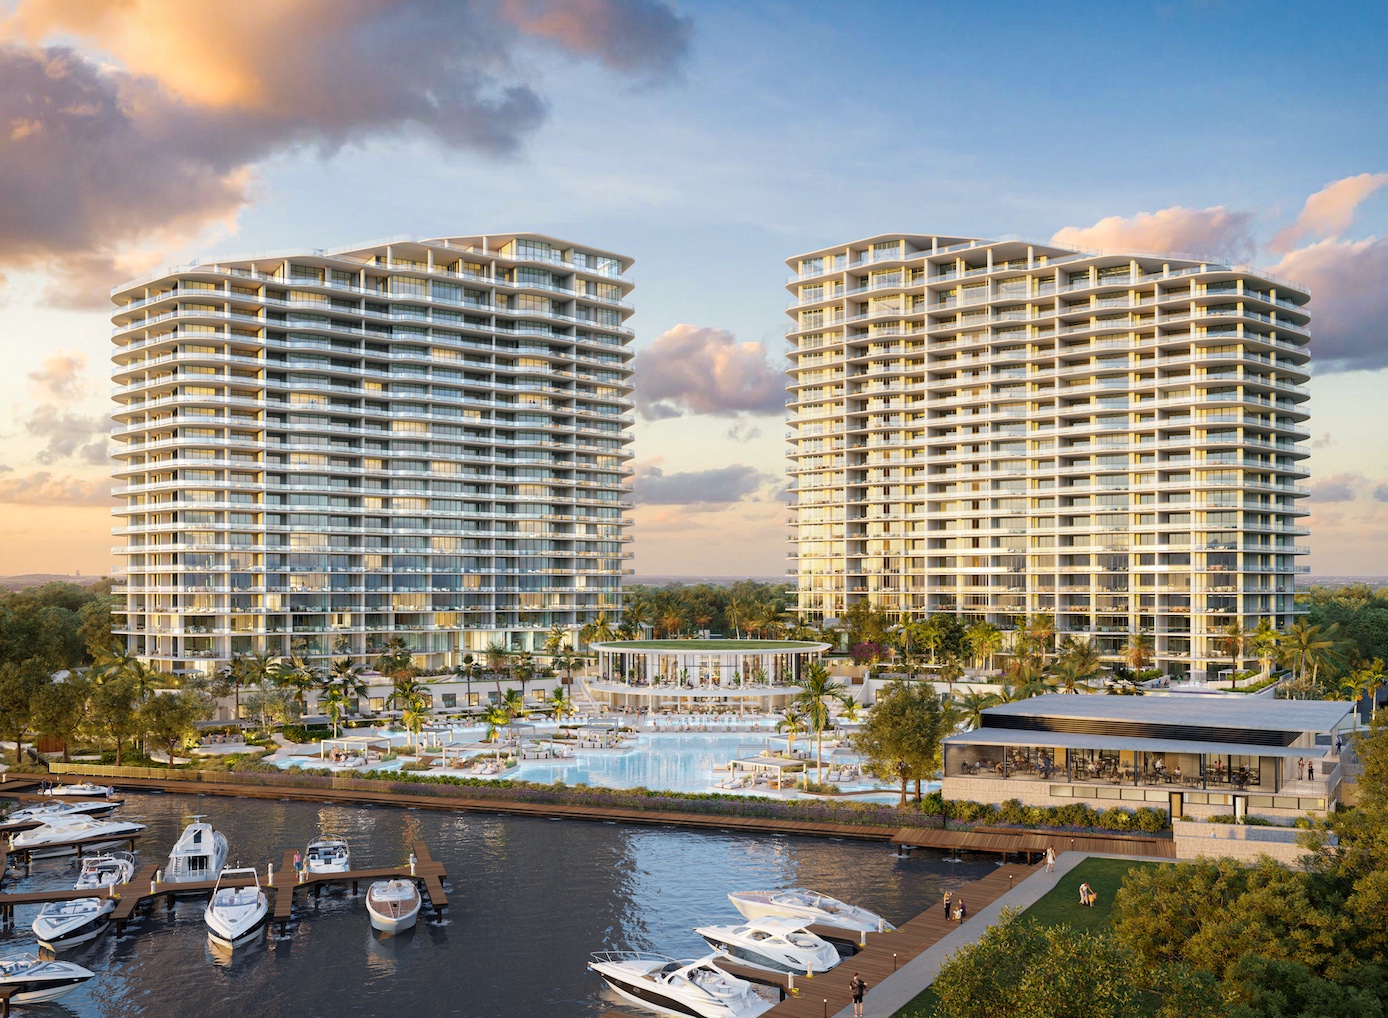 Saltleaf Marina with a waterfront restaurant, residences and a pool in the background